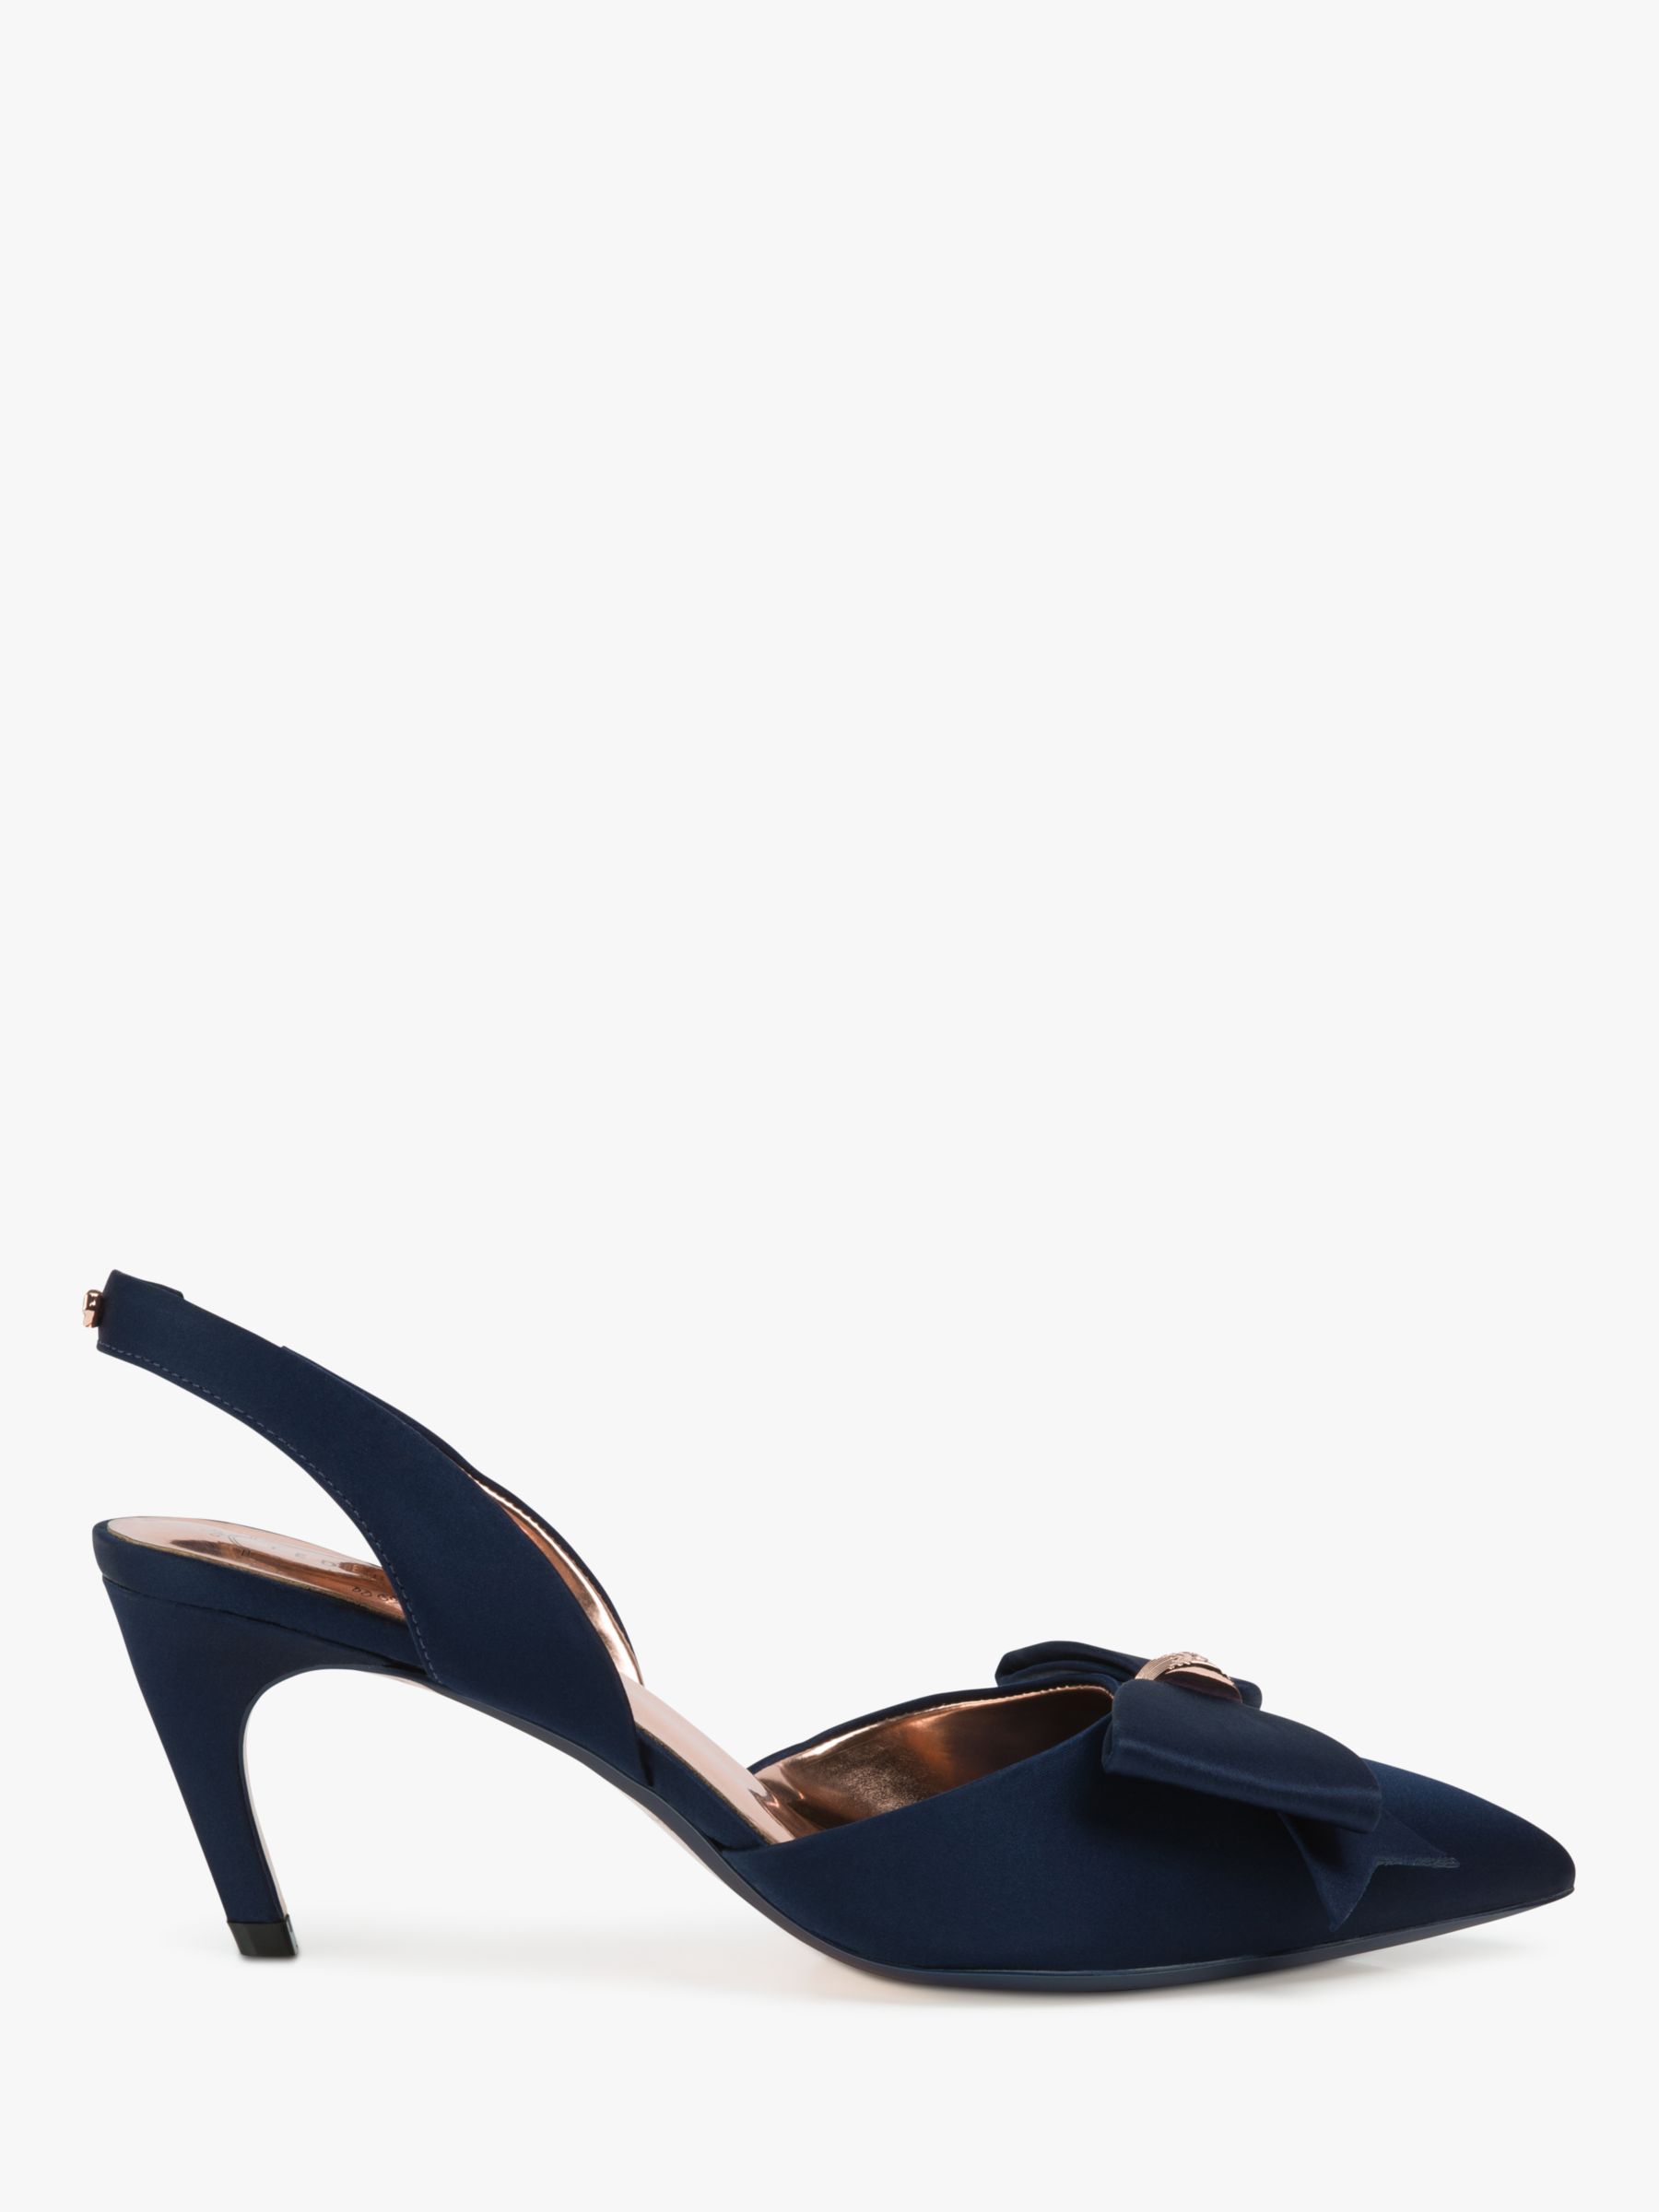 Buy Ted Baker Aidelas Bow Sling Back Court Shoes, Navy, 3 Online at johnlewis.com